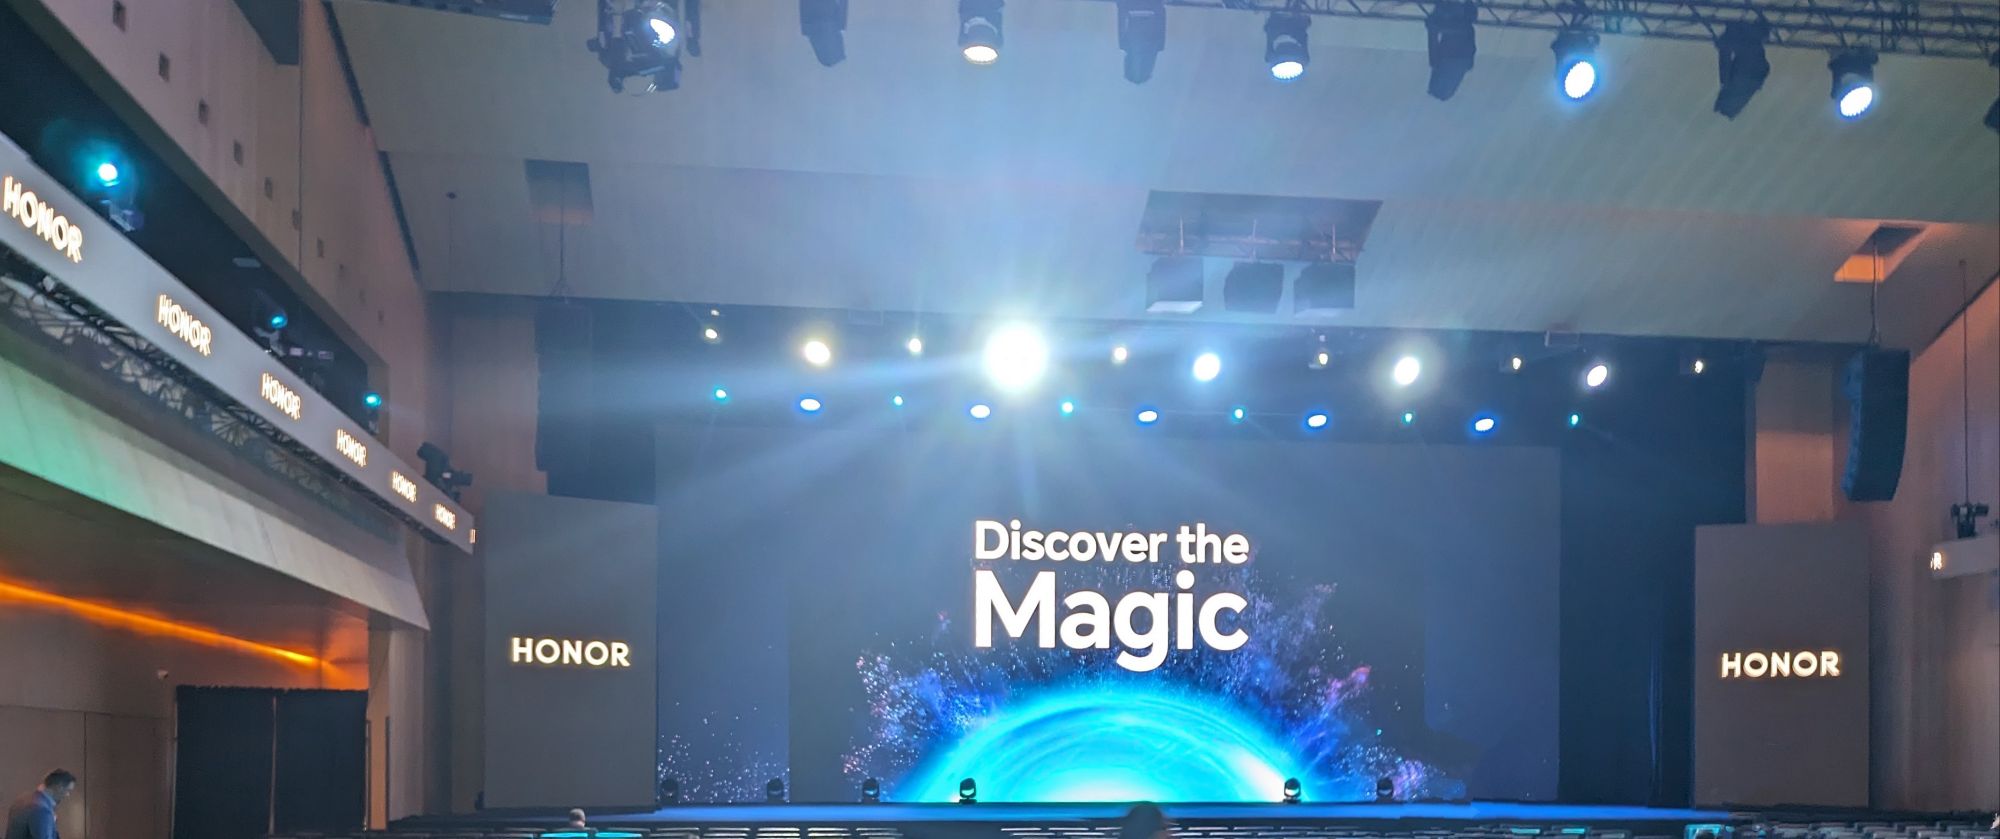 #MWC24   Honor Magic6 Pro launched